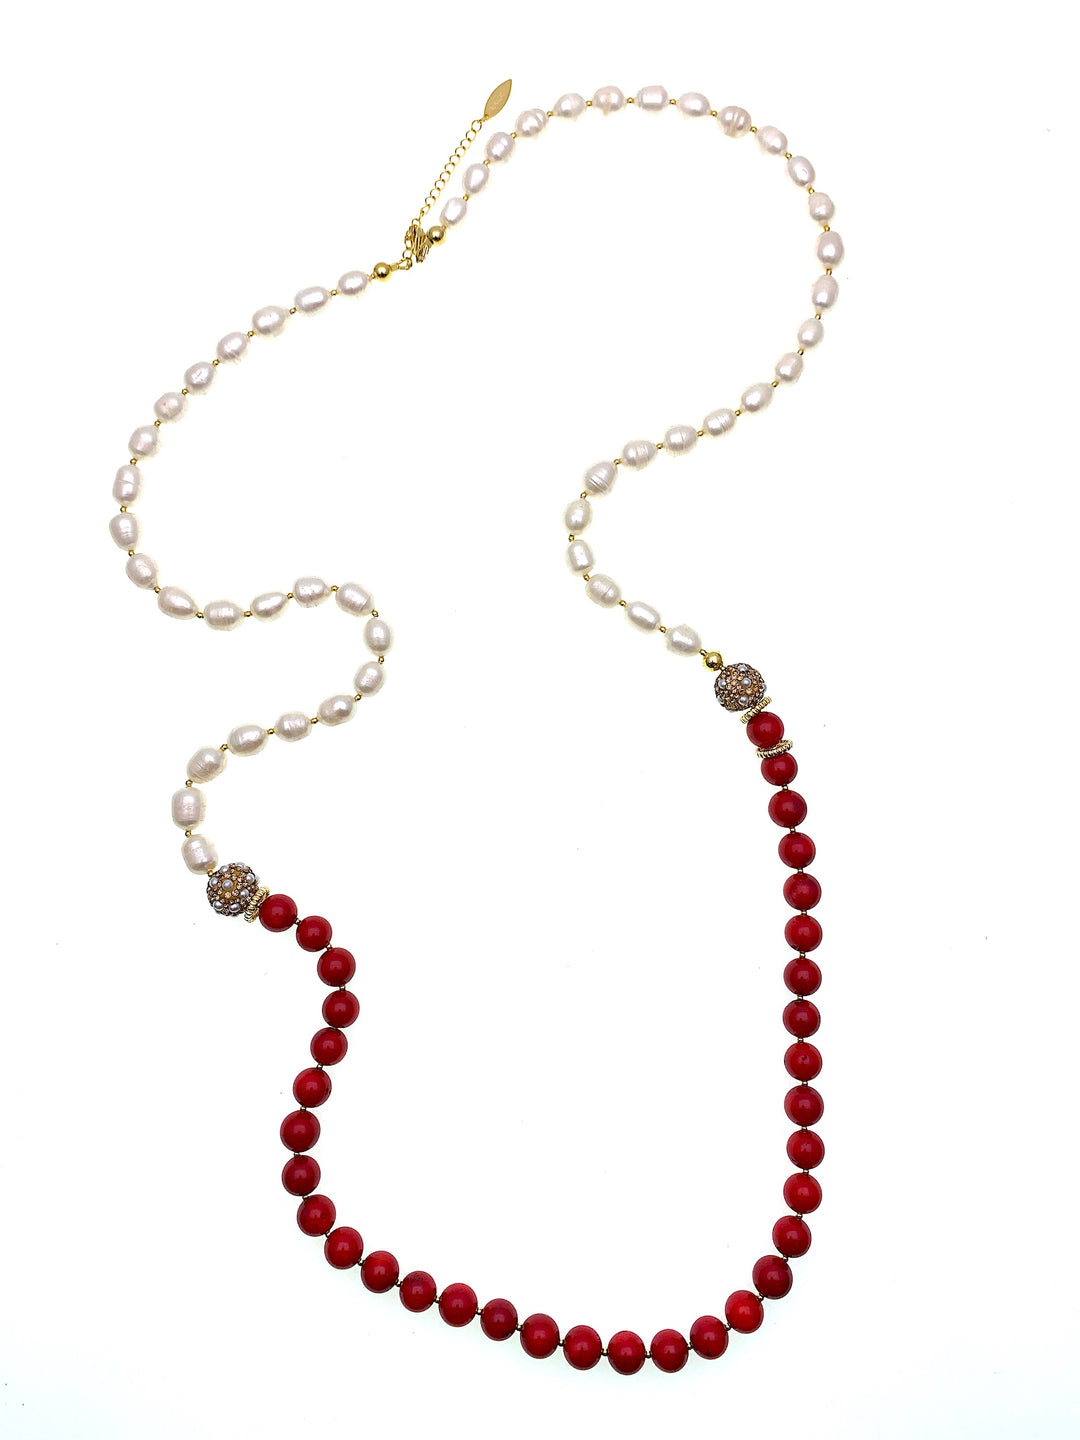 Freshwater Pearls with Red Corals Two Ways Necklace FN008 - FARRA